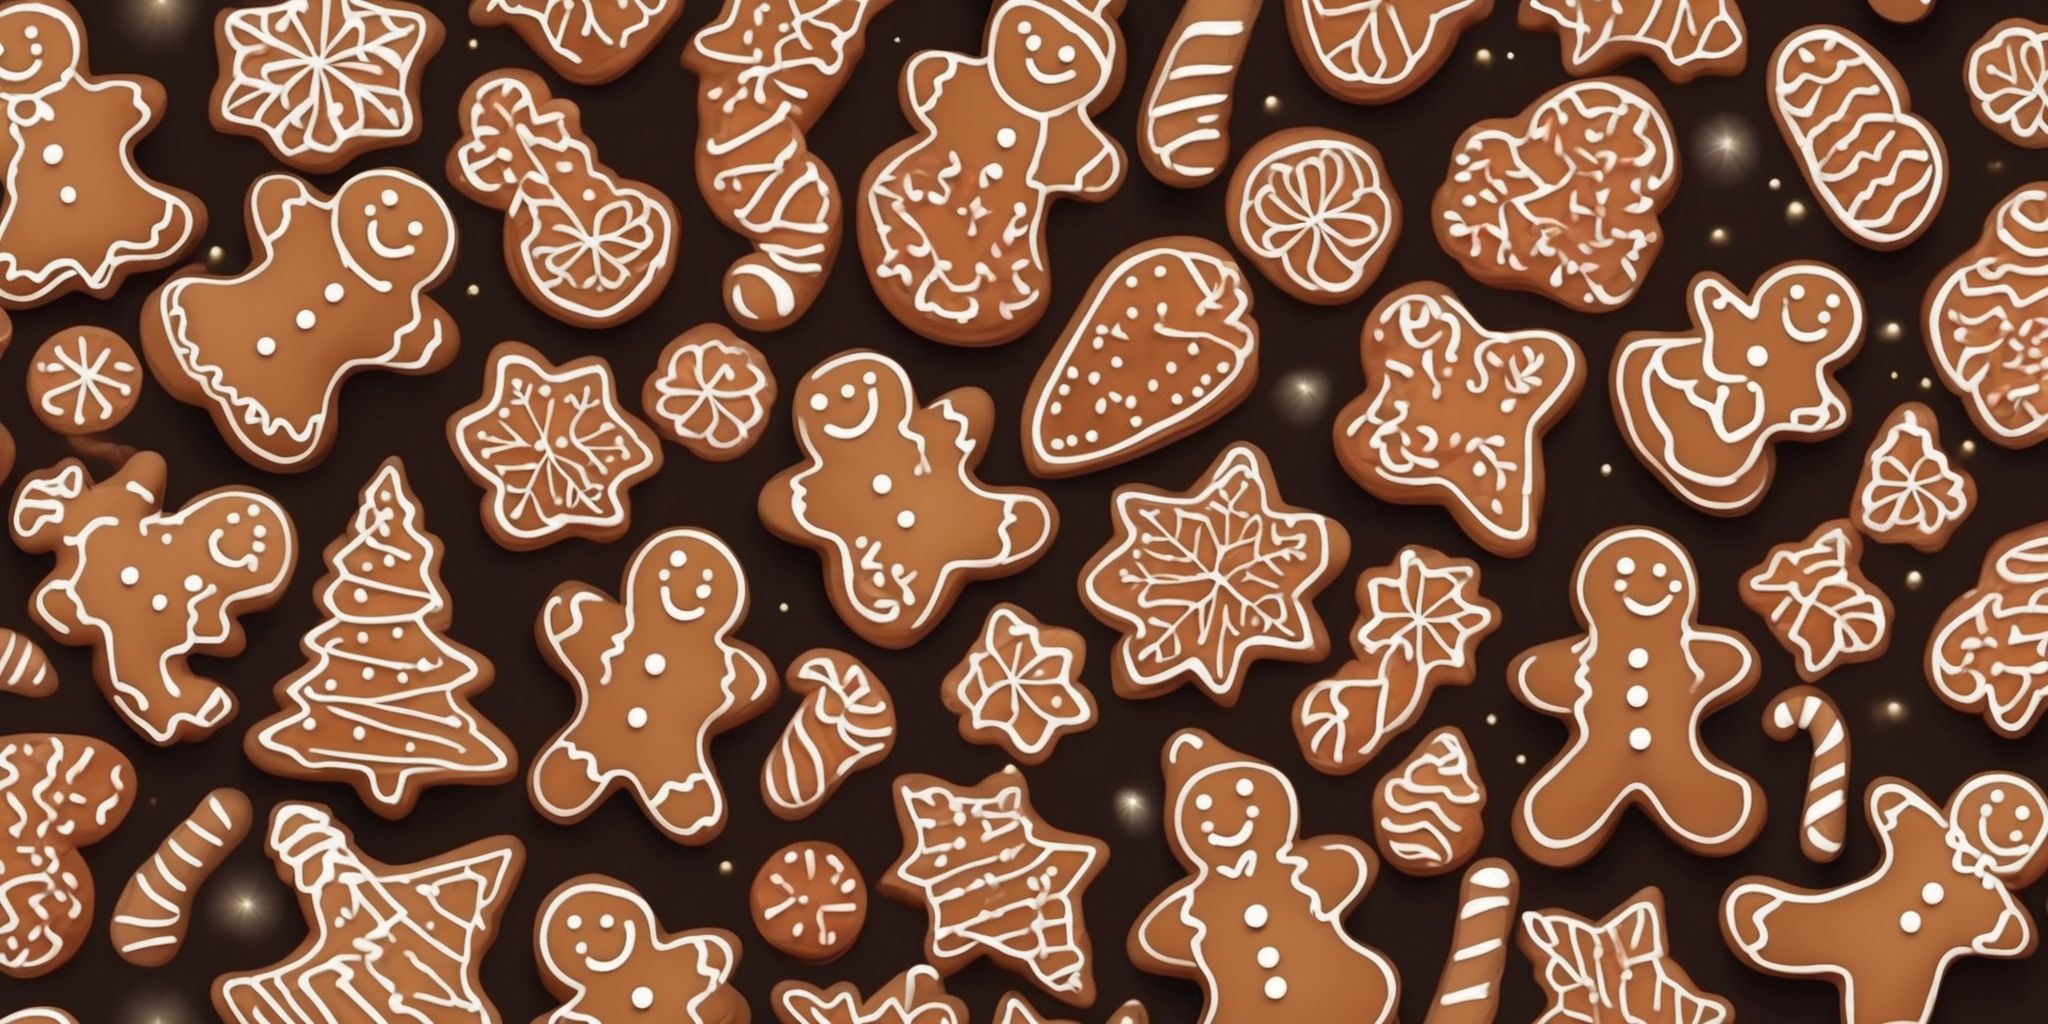 Gingerbread in realistic Christmas style